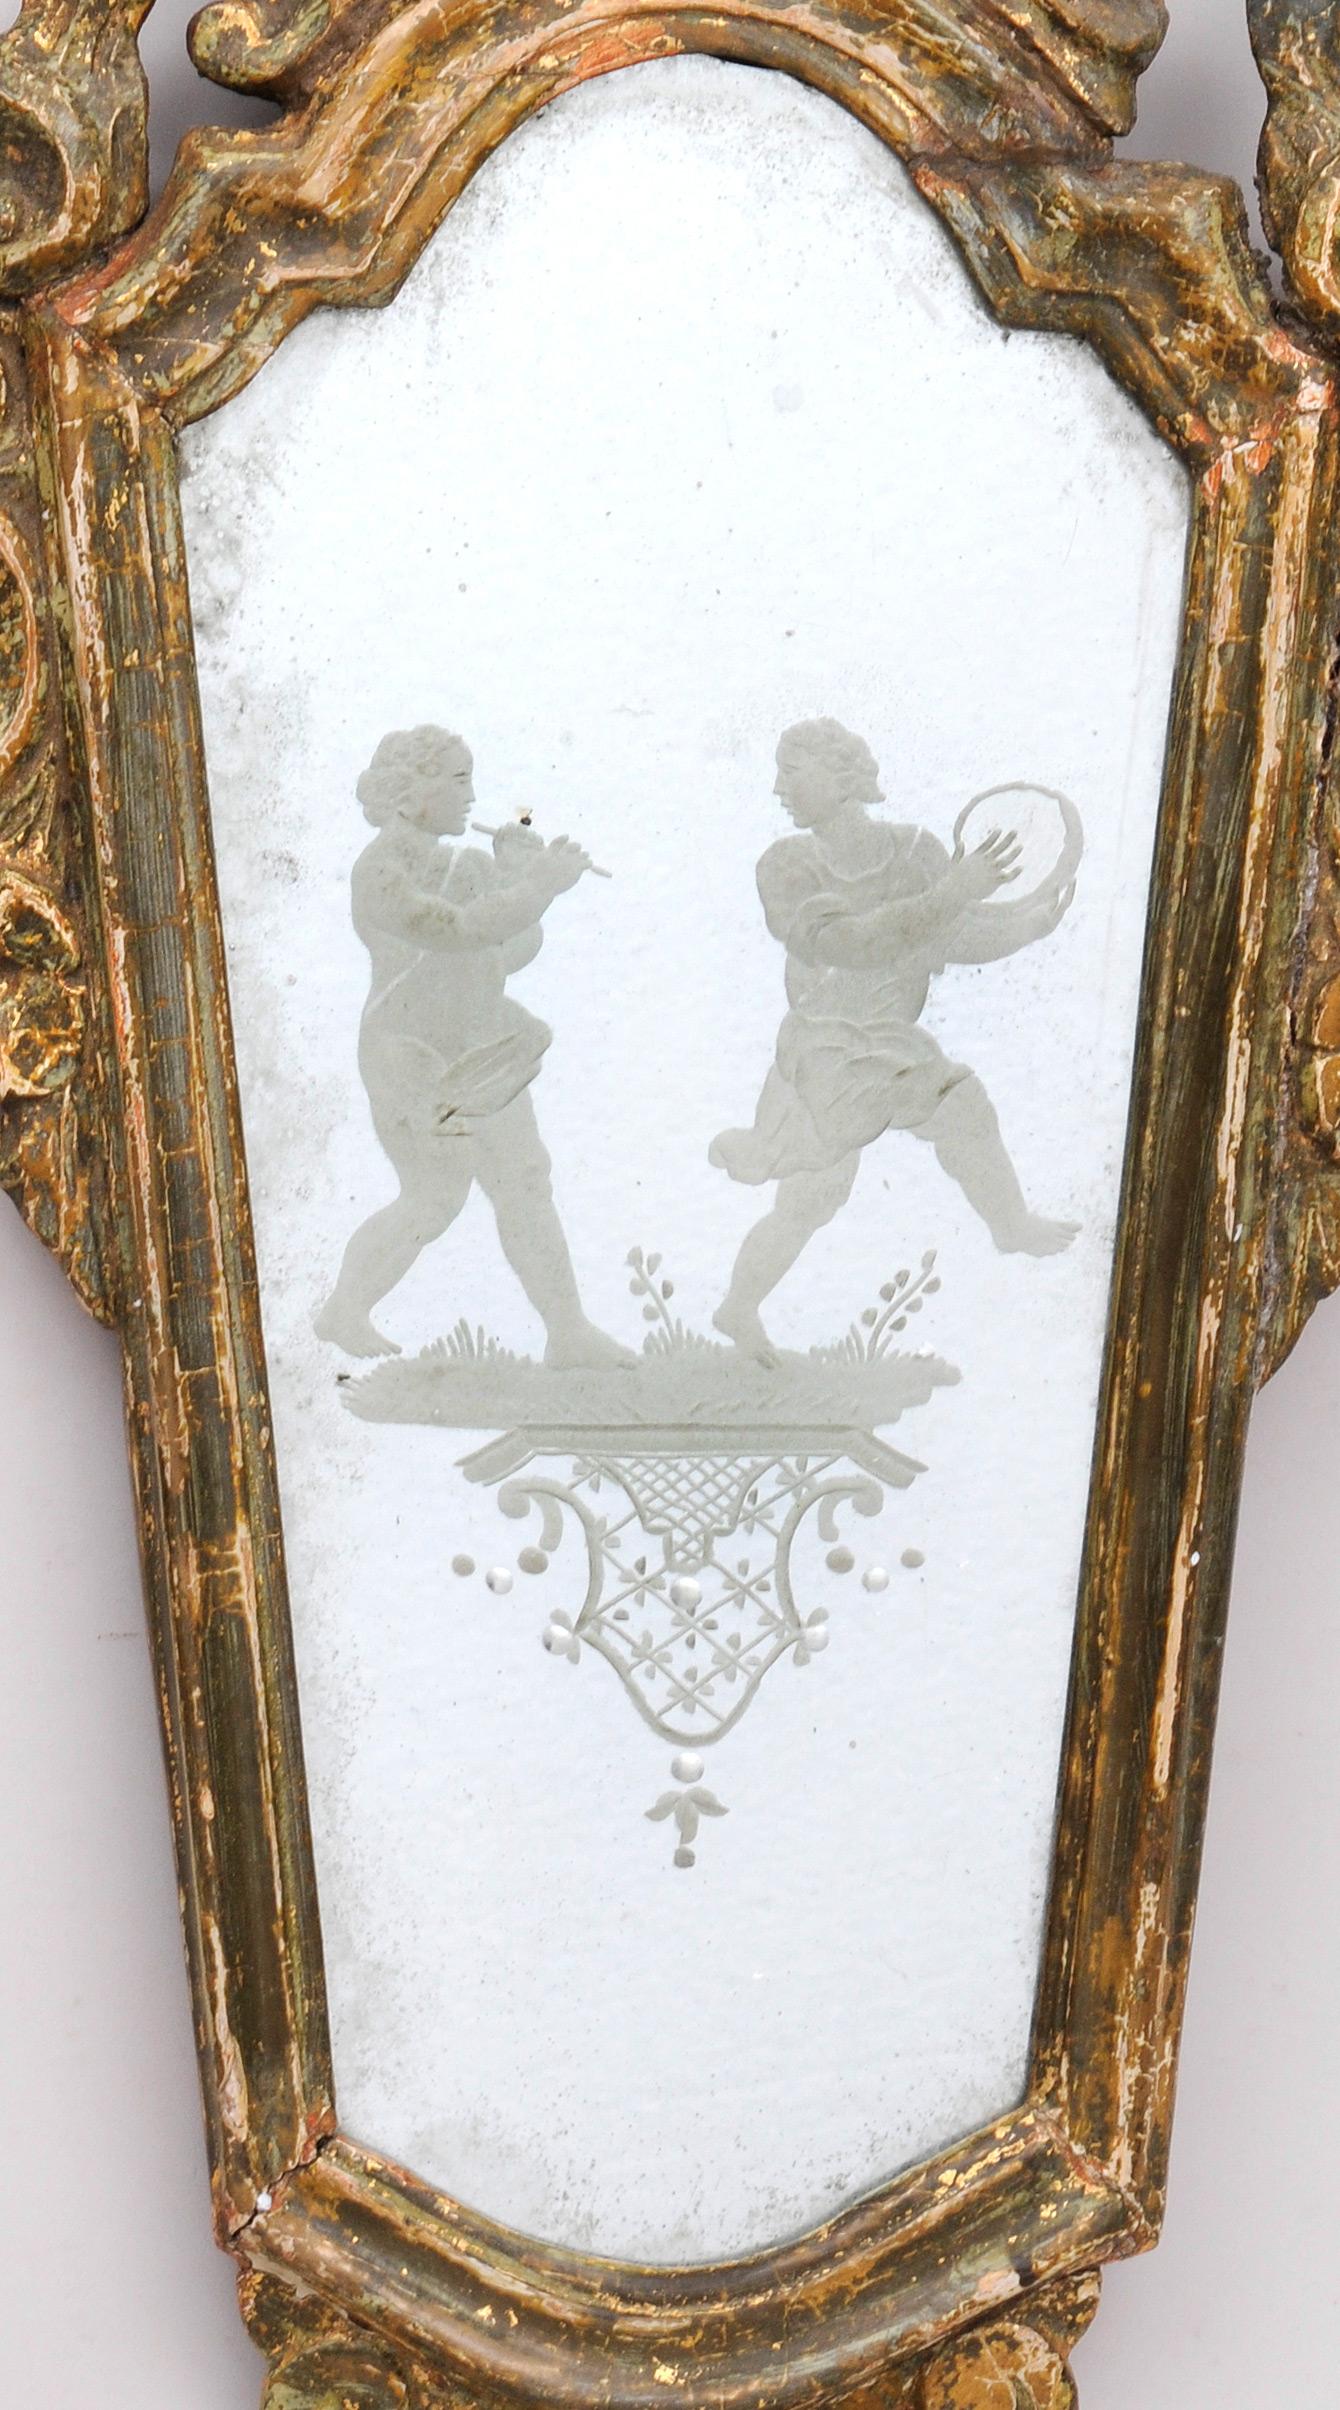 Venetian giltwood mirror with frame robustly carved with shell crest and both C-scroll and foliate borders enclosing a plate with engraved figures of marching musicians playing the flute and tambourine on a grassy patch, carved pendant below, some